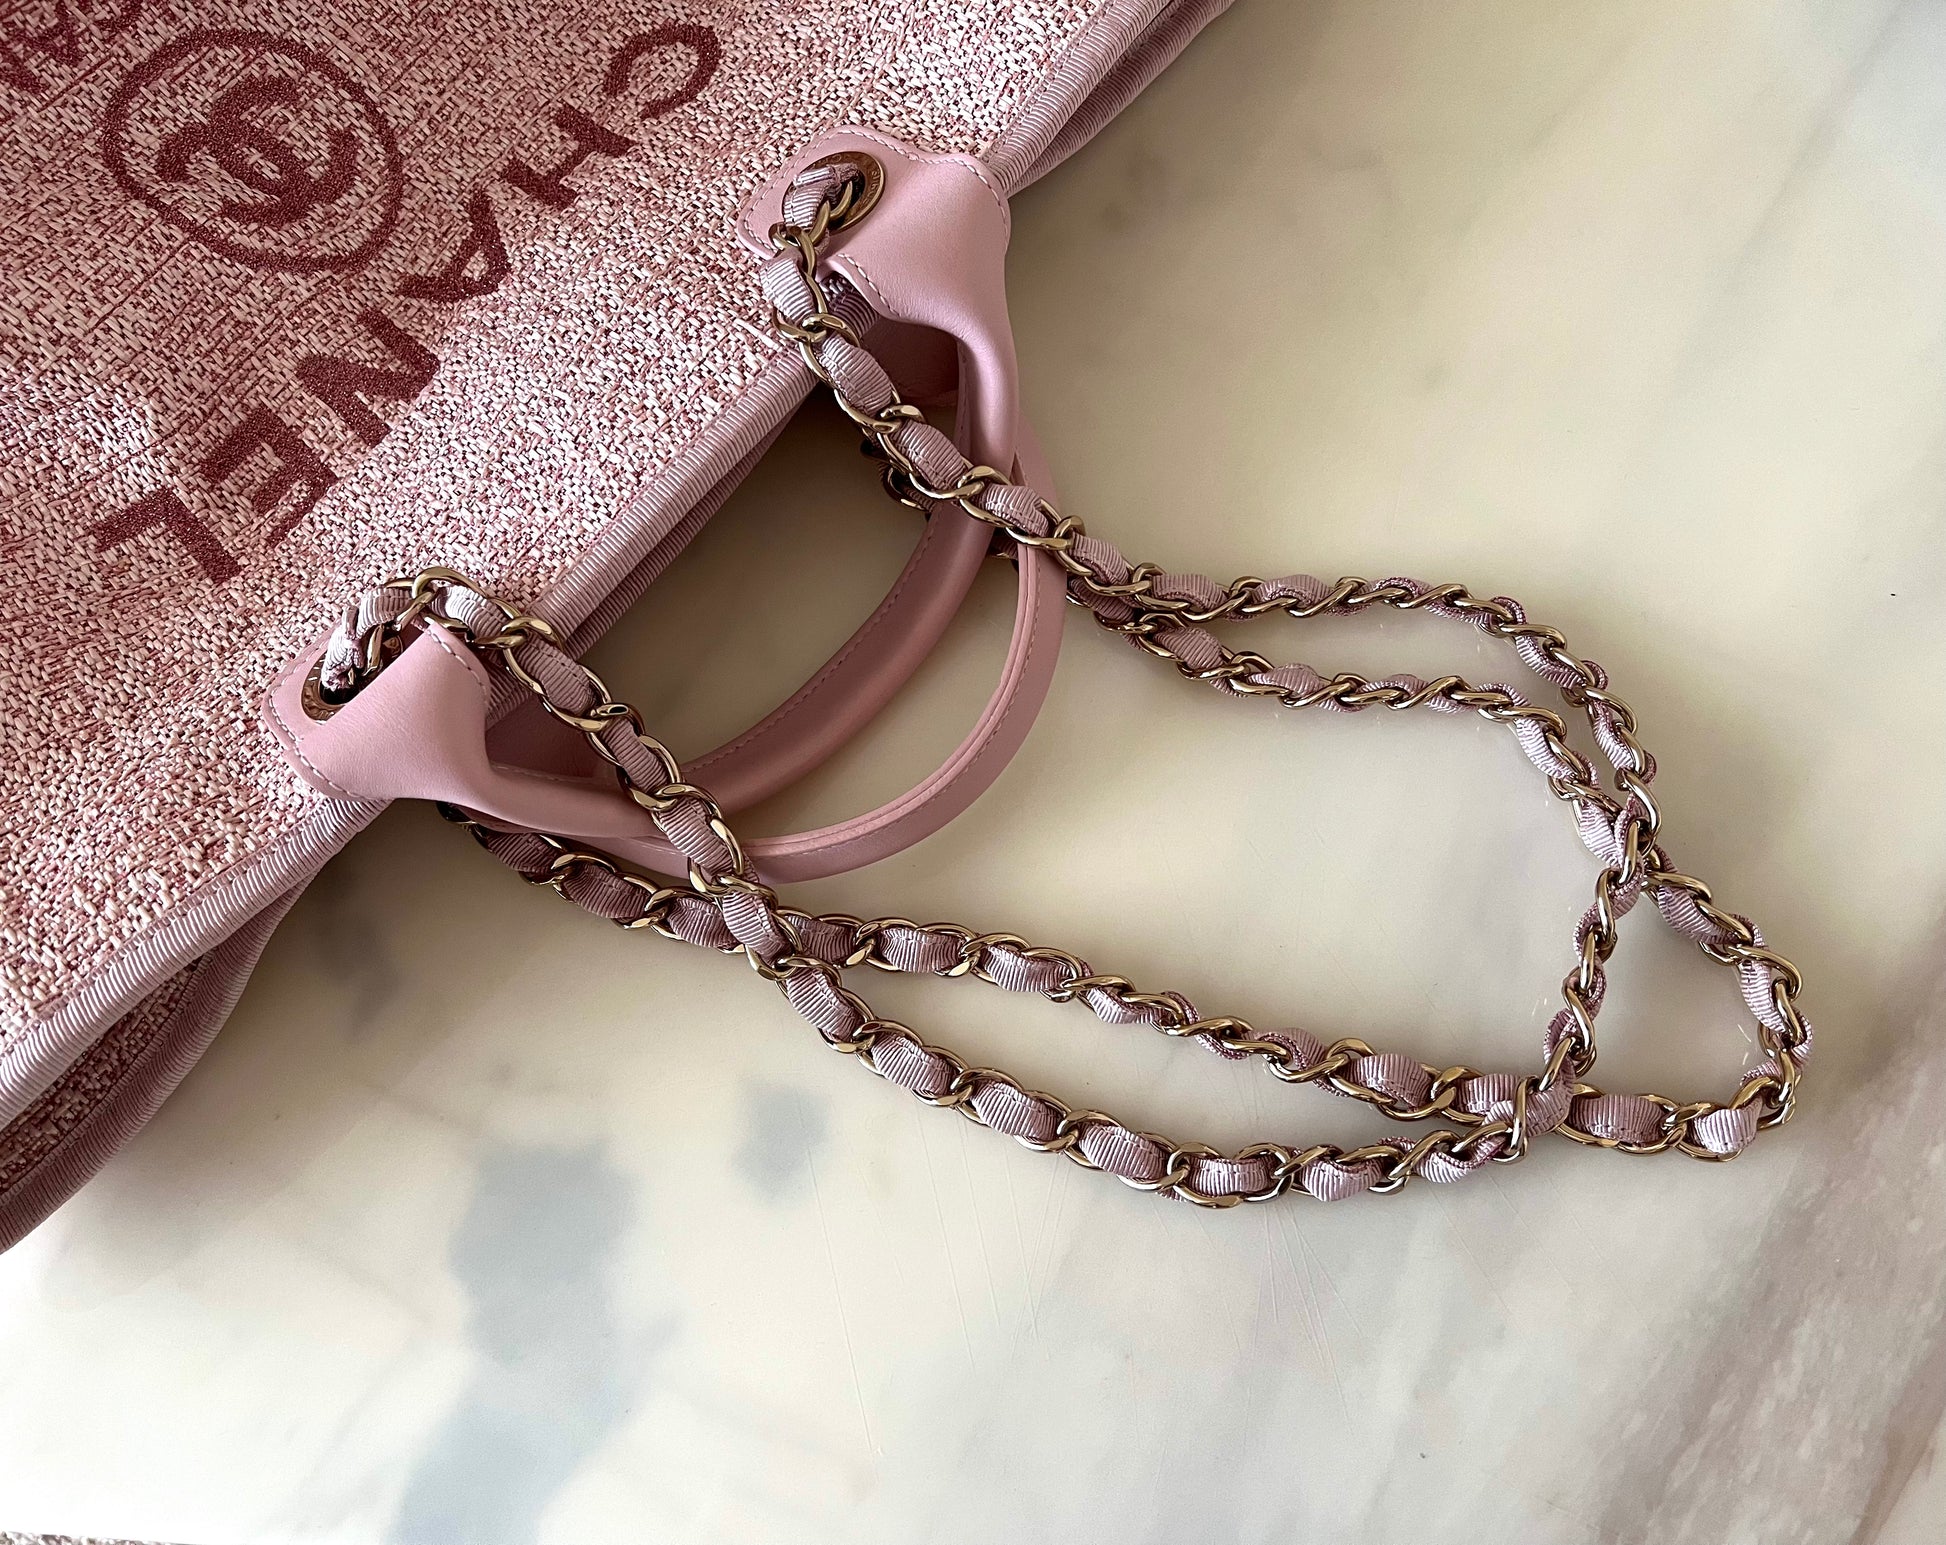 Chanel - Deauville Tote - Pink Fabrics - Glitter Detailing